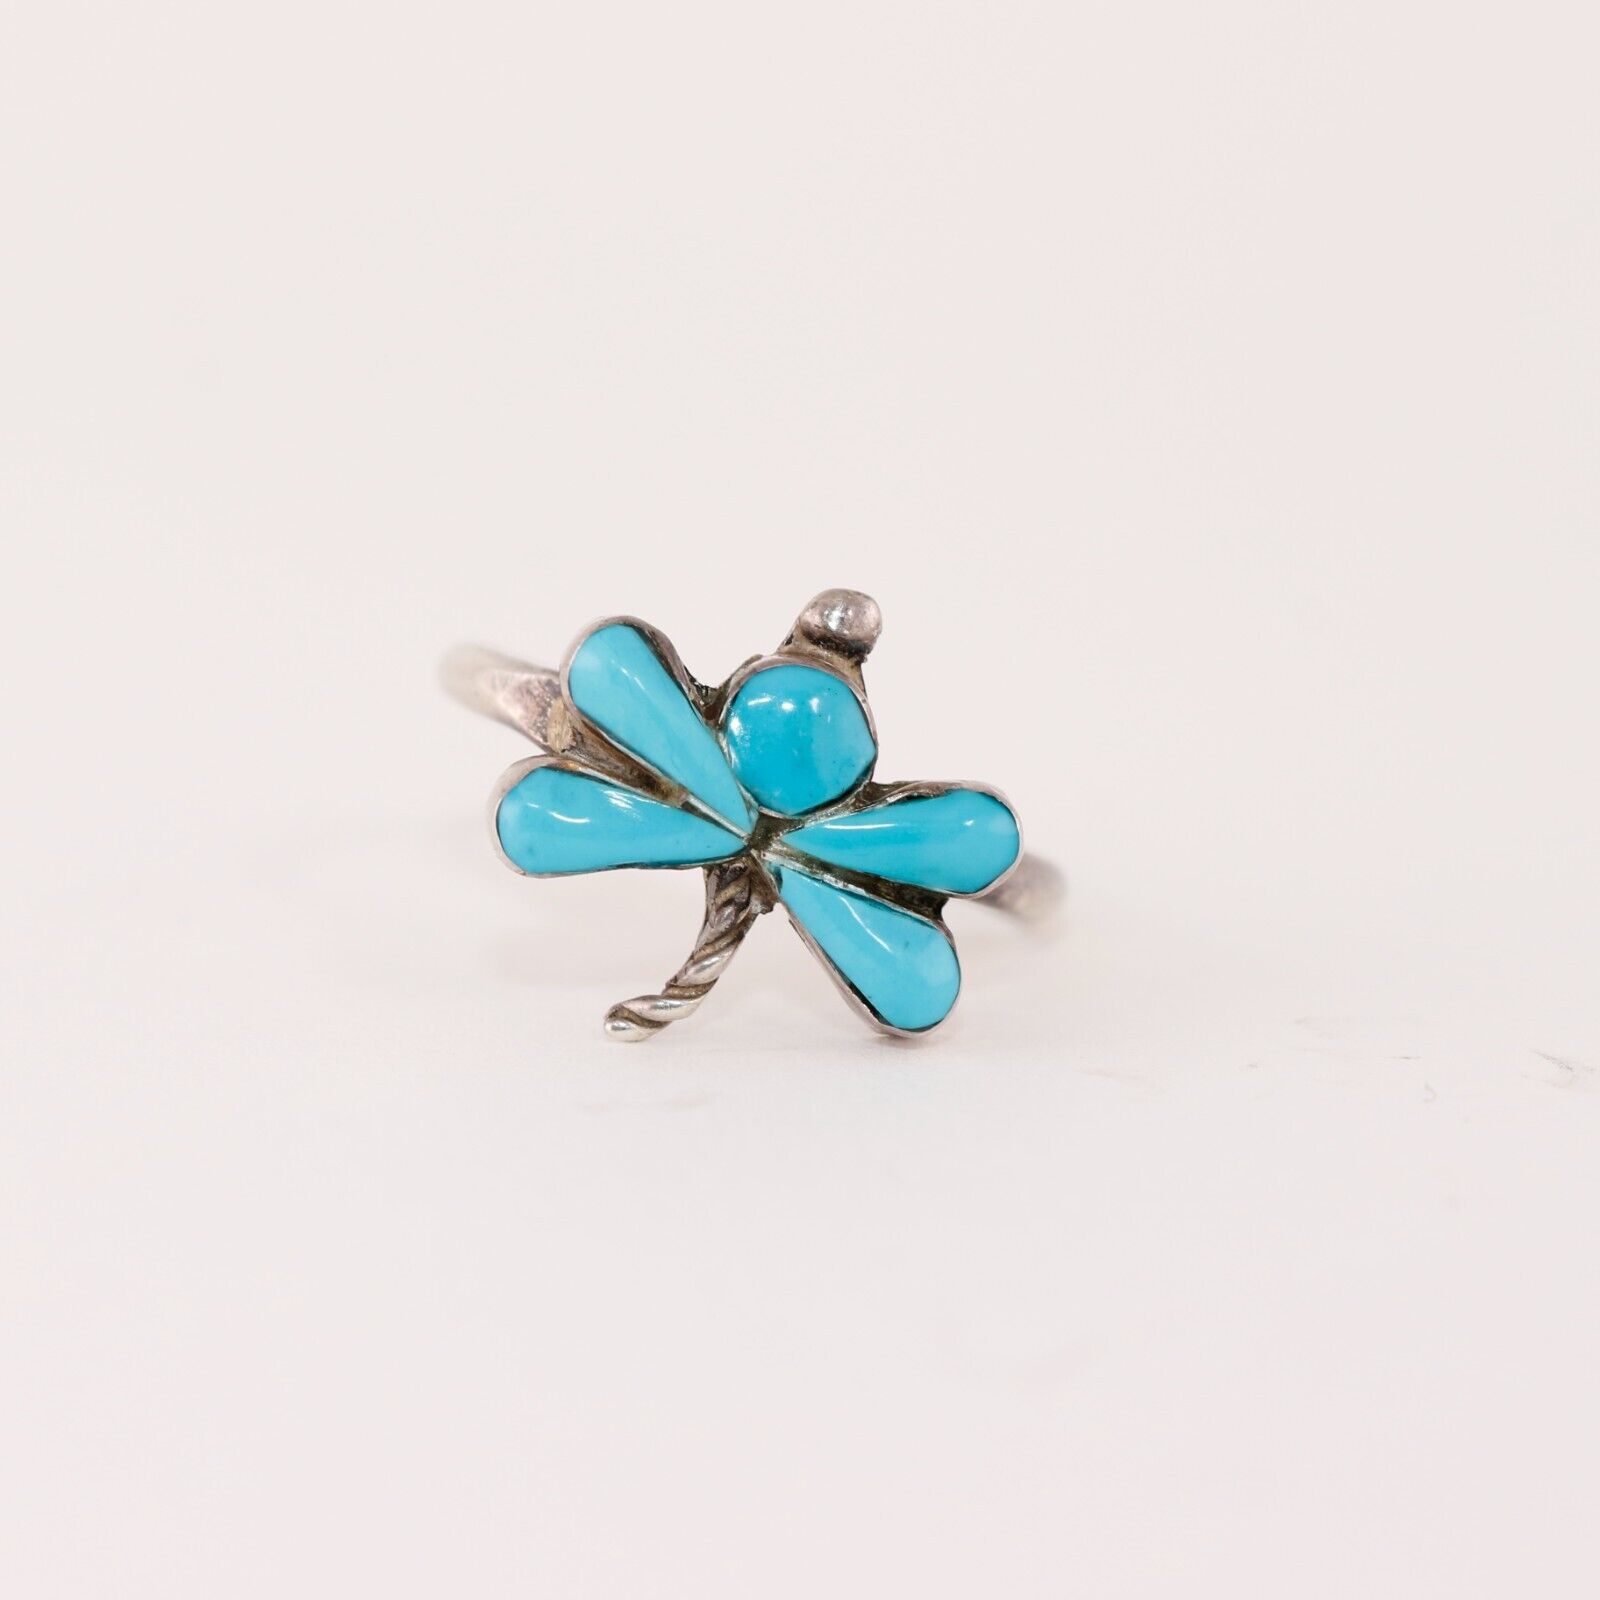 OLD PAWN STERLING SILVER TURQUOISE INLAY DRAGONFLY RING 8